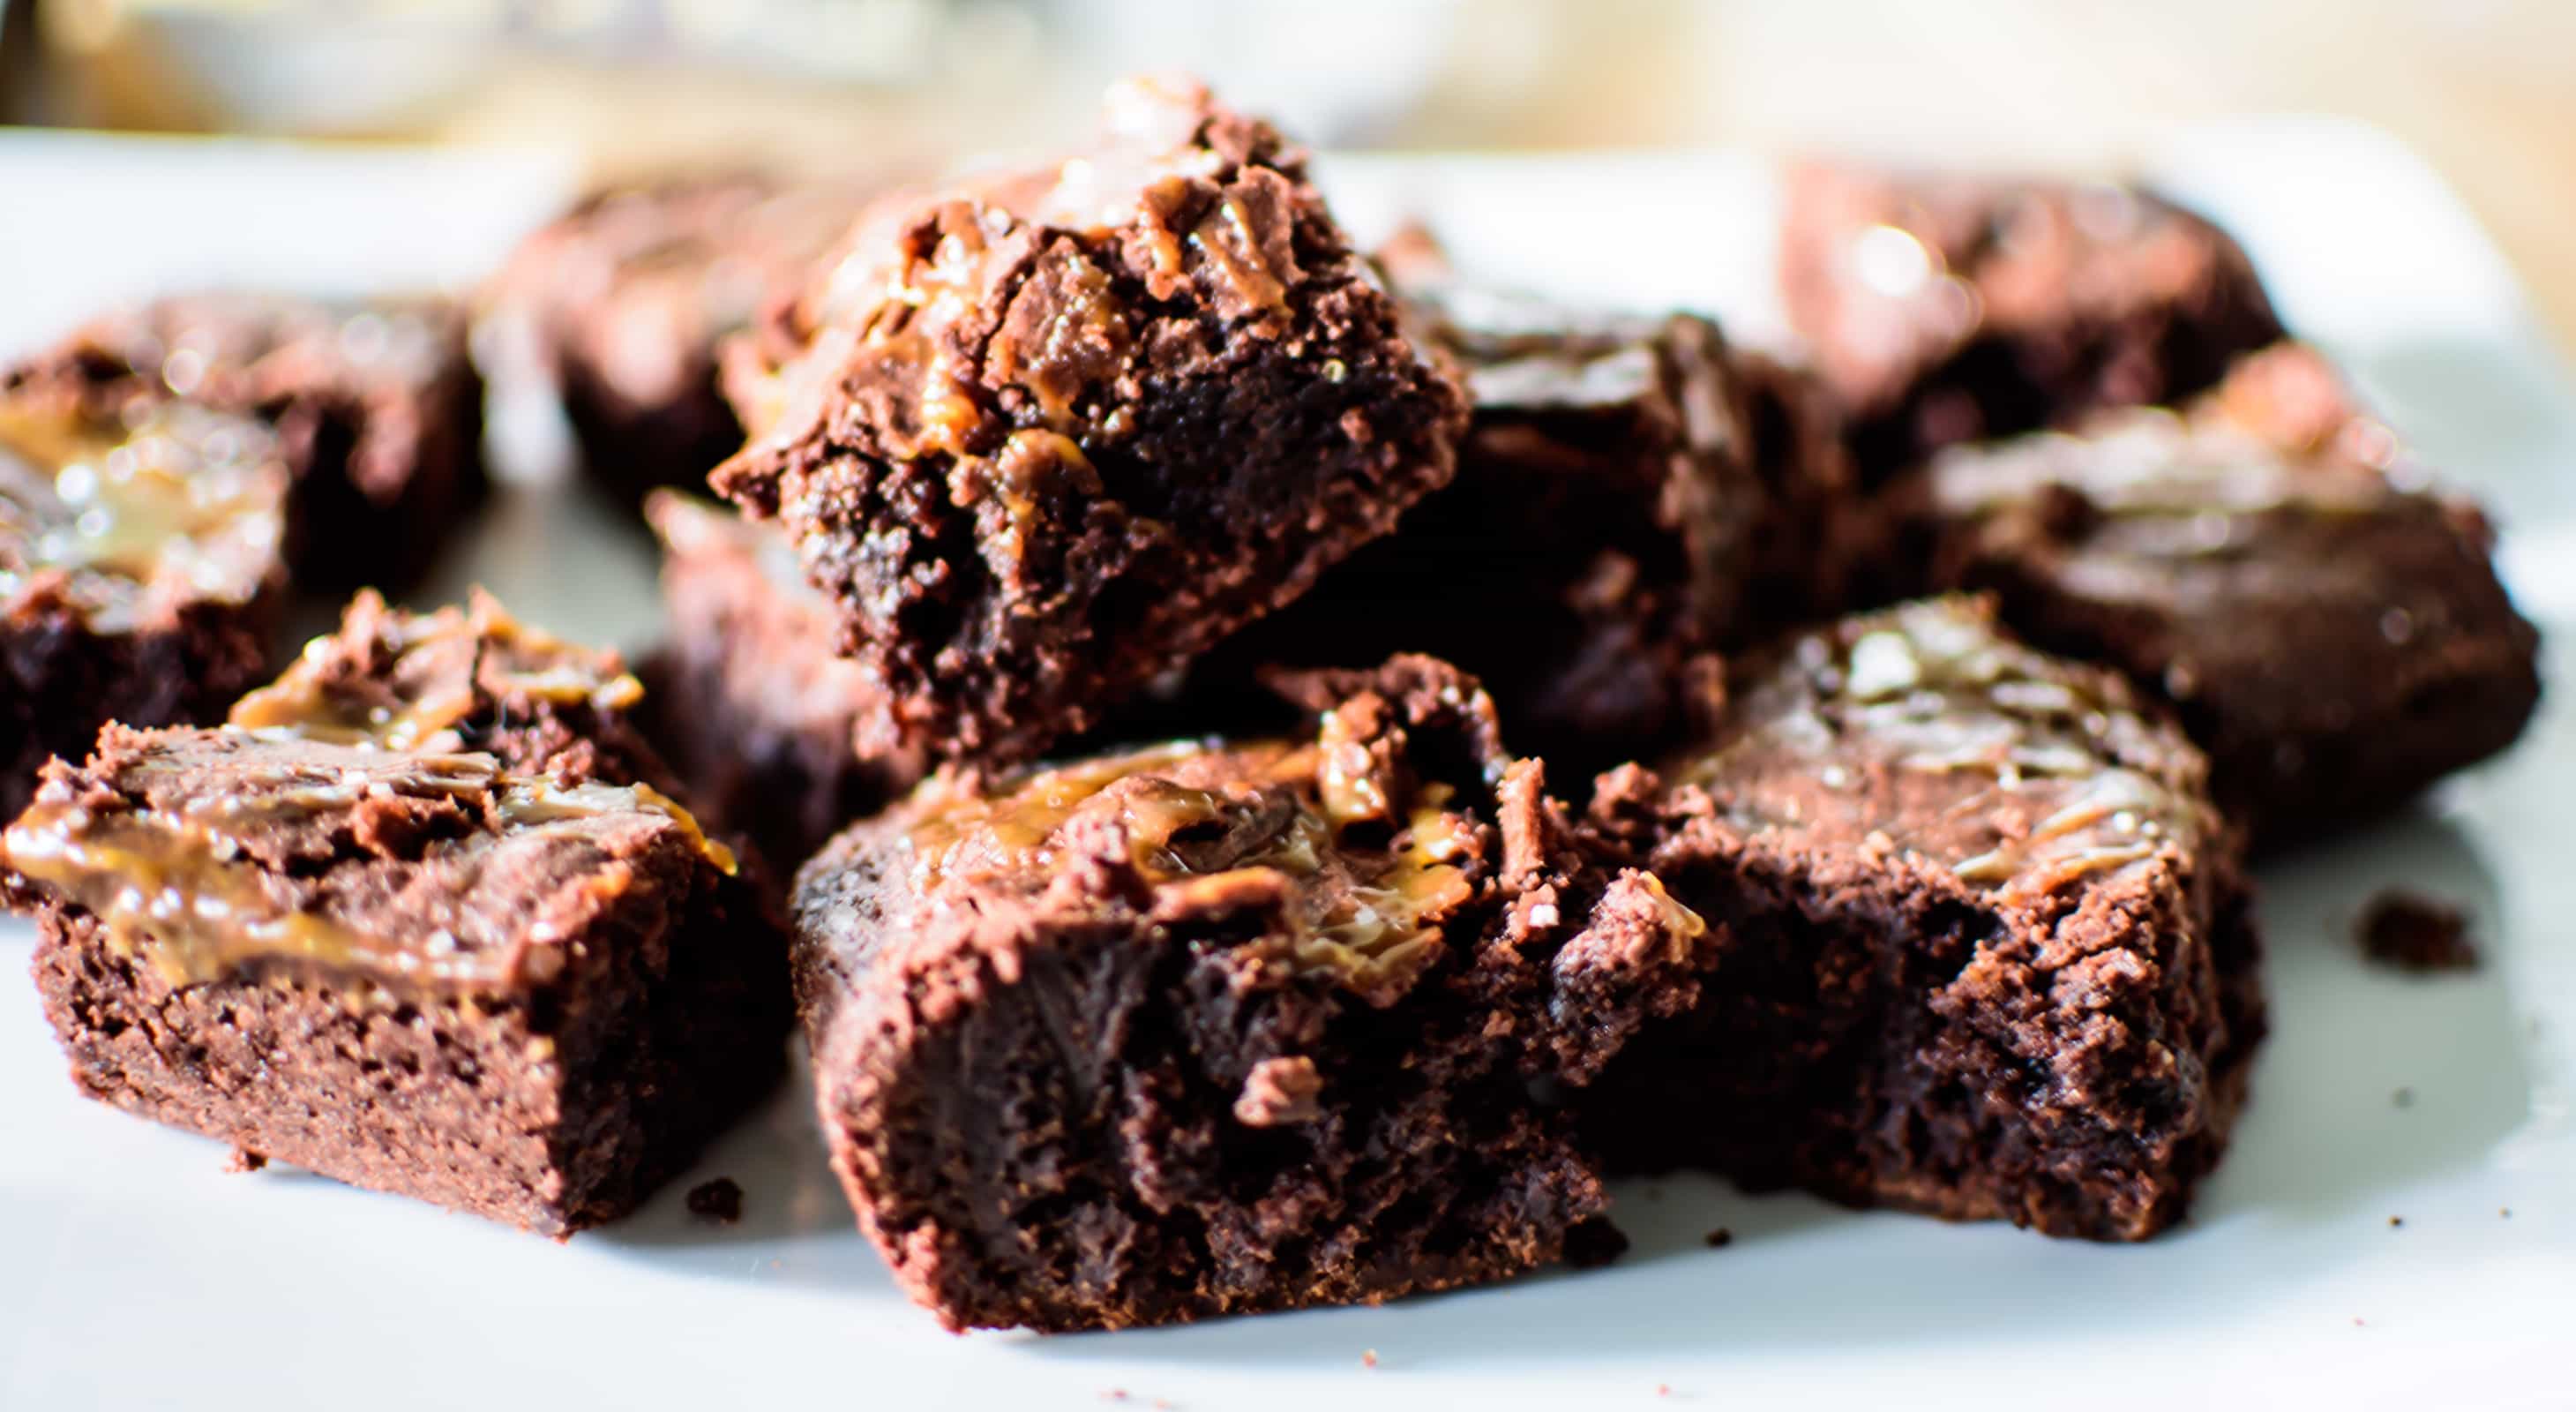 A plate of brownies with chopped nuts